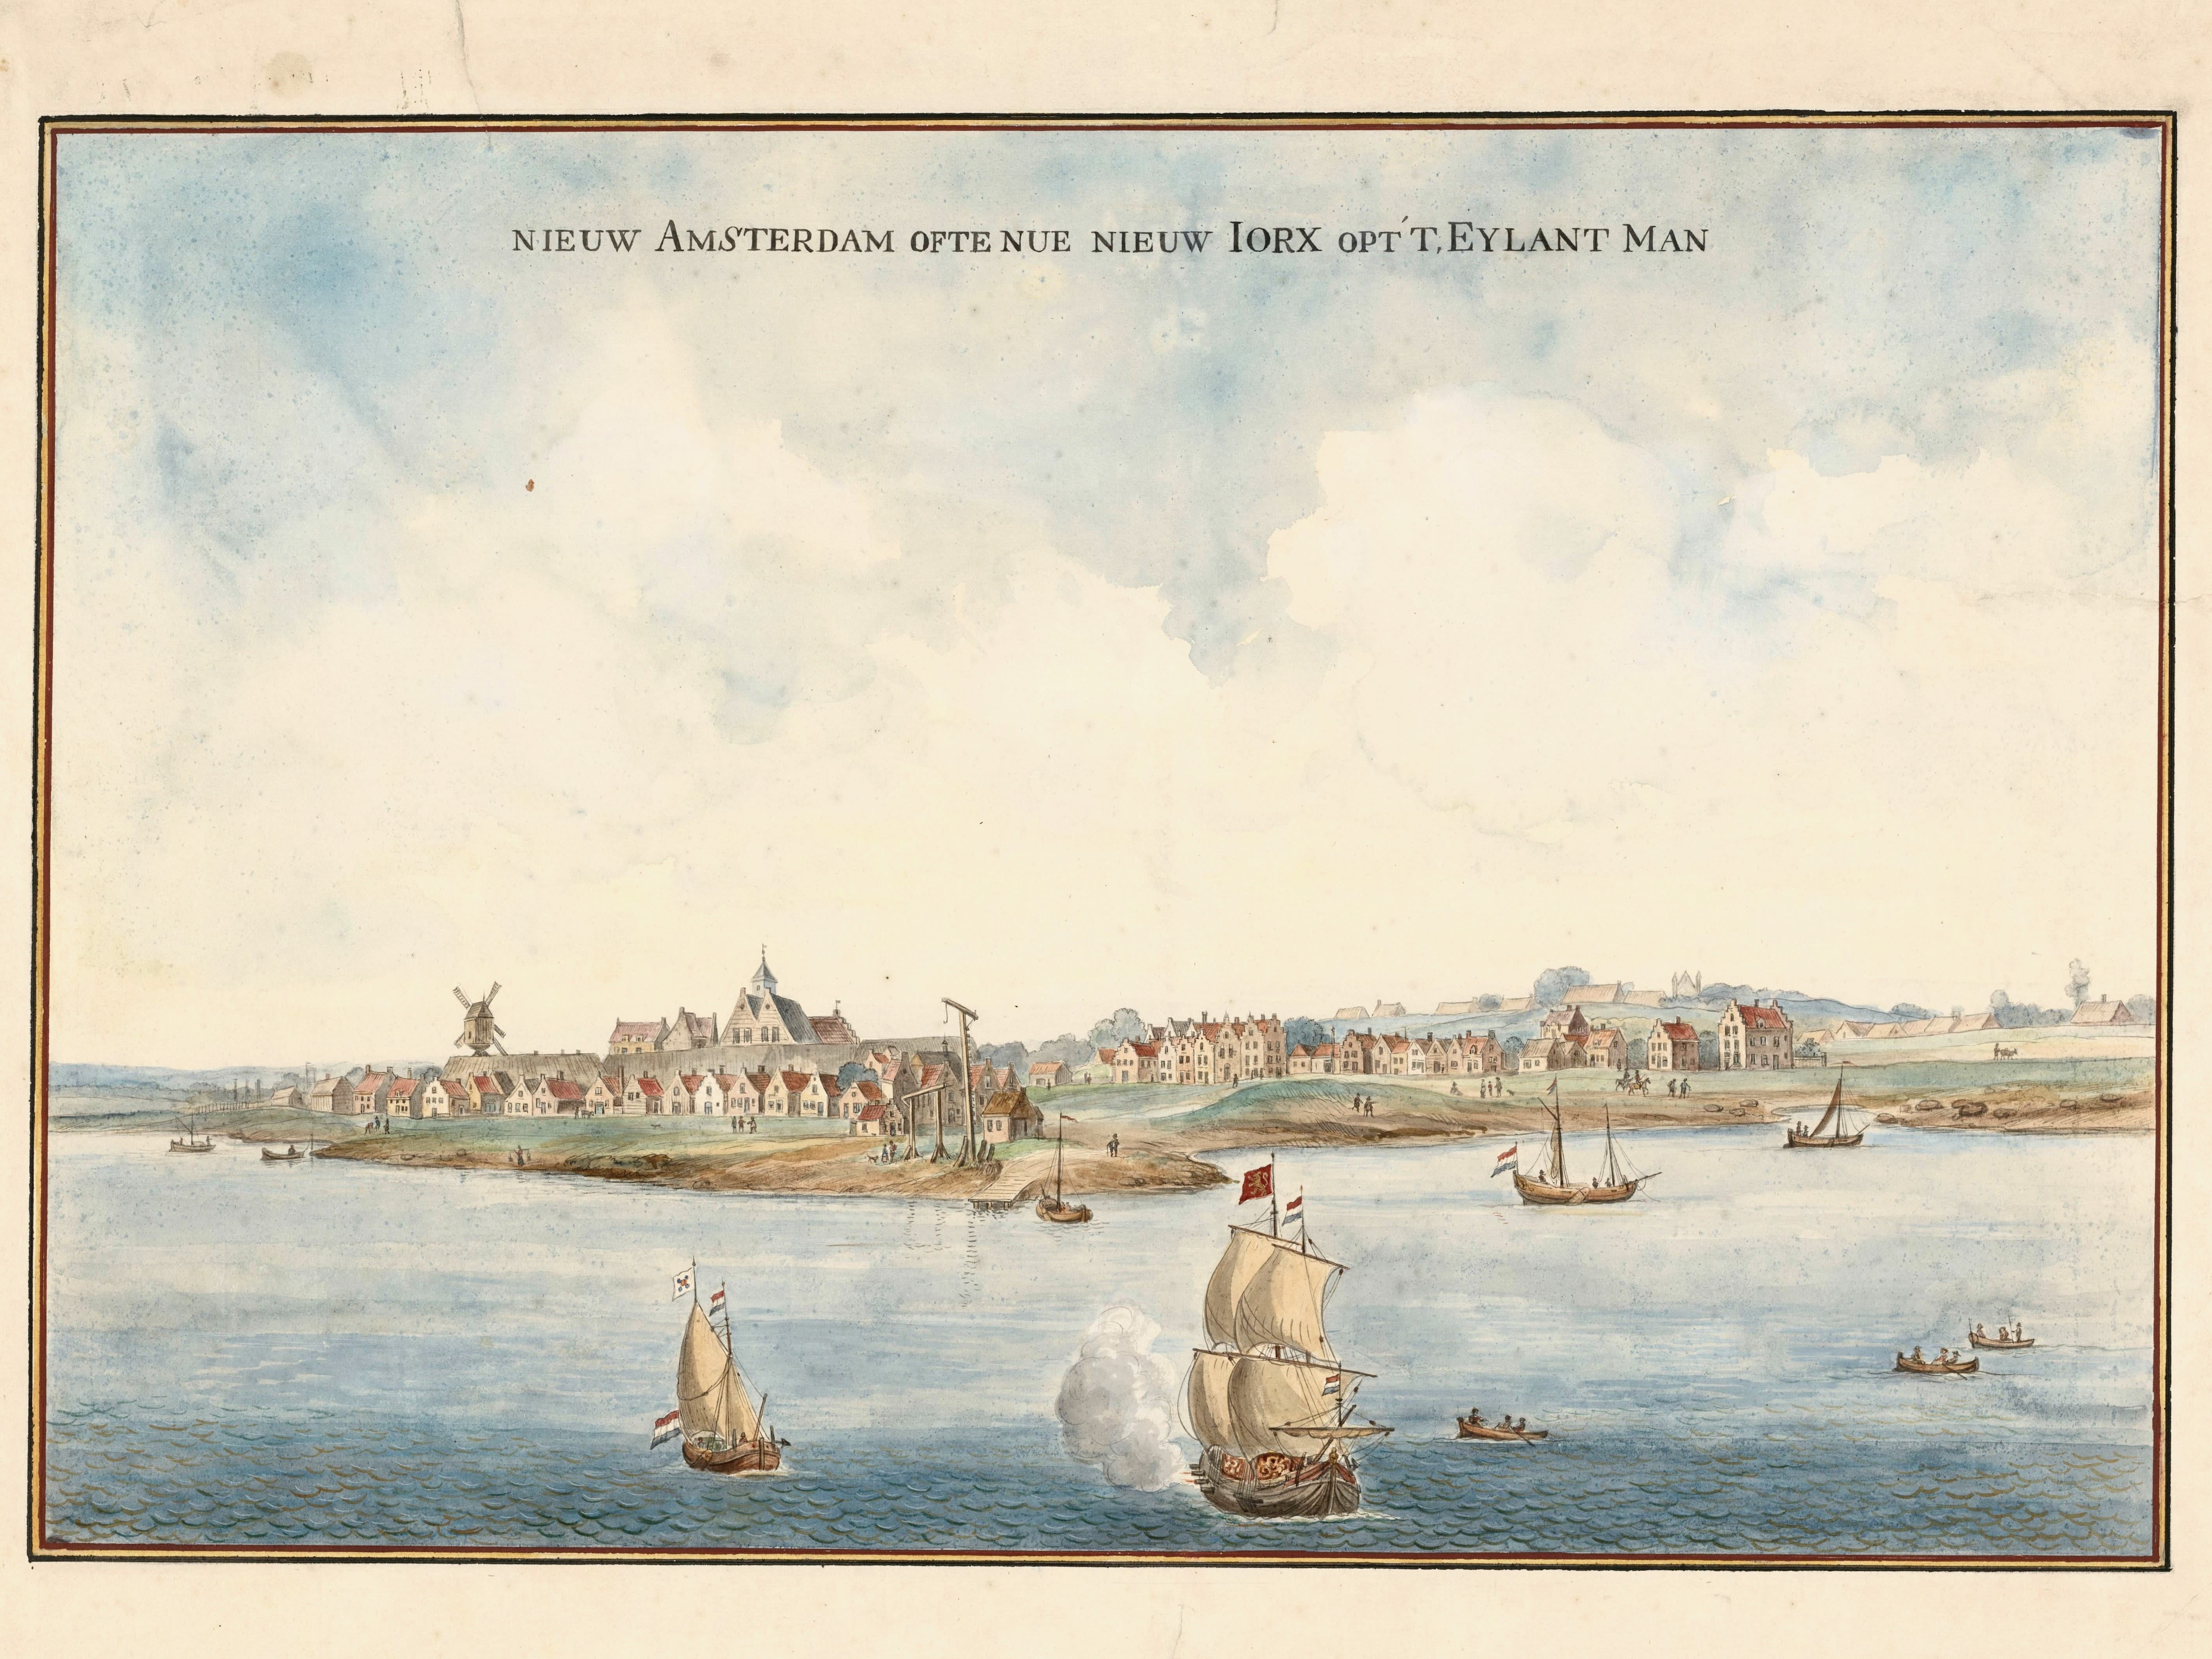 Happy 400th Birthday to New Amsterdam, the Dutch Settlement That Became New York